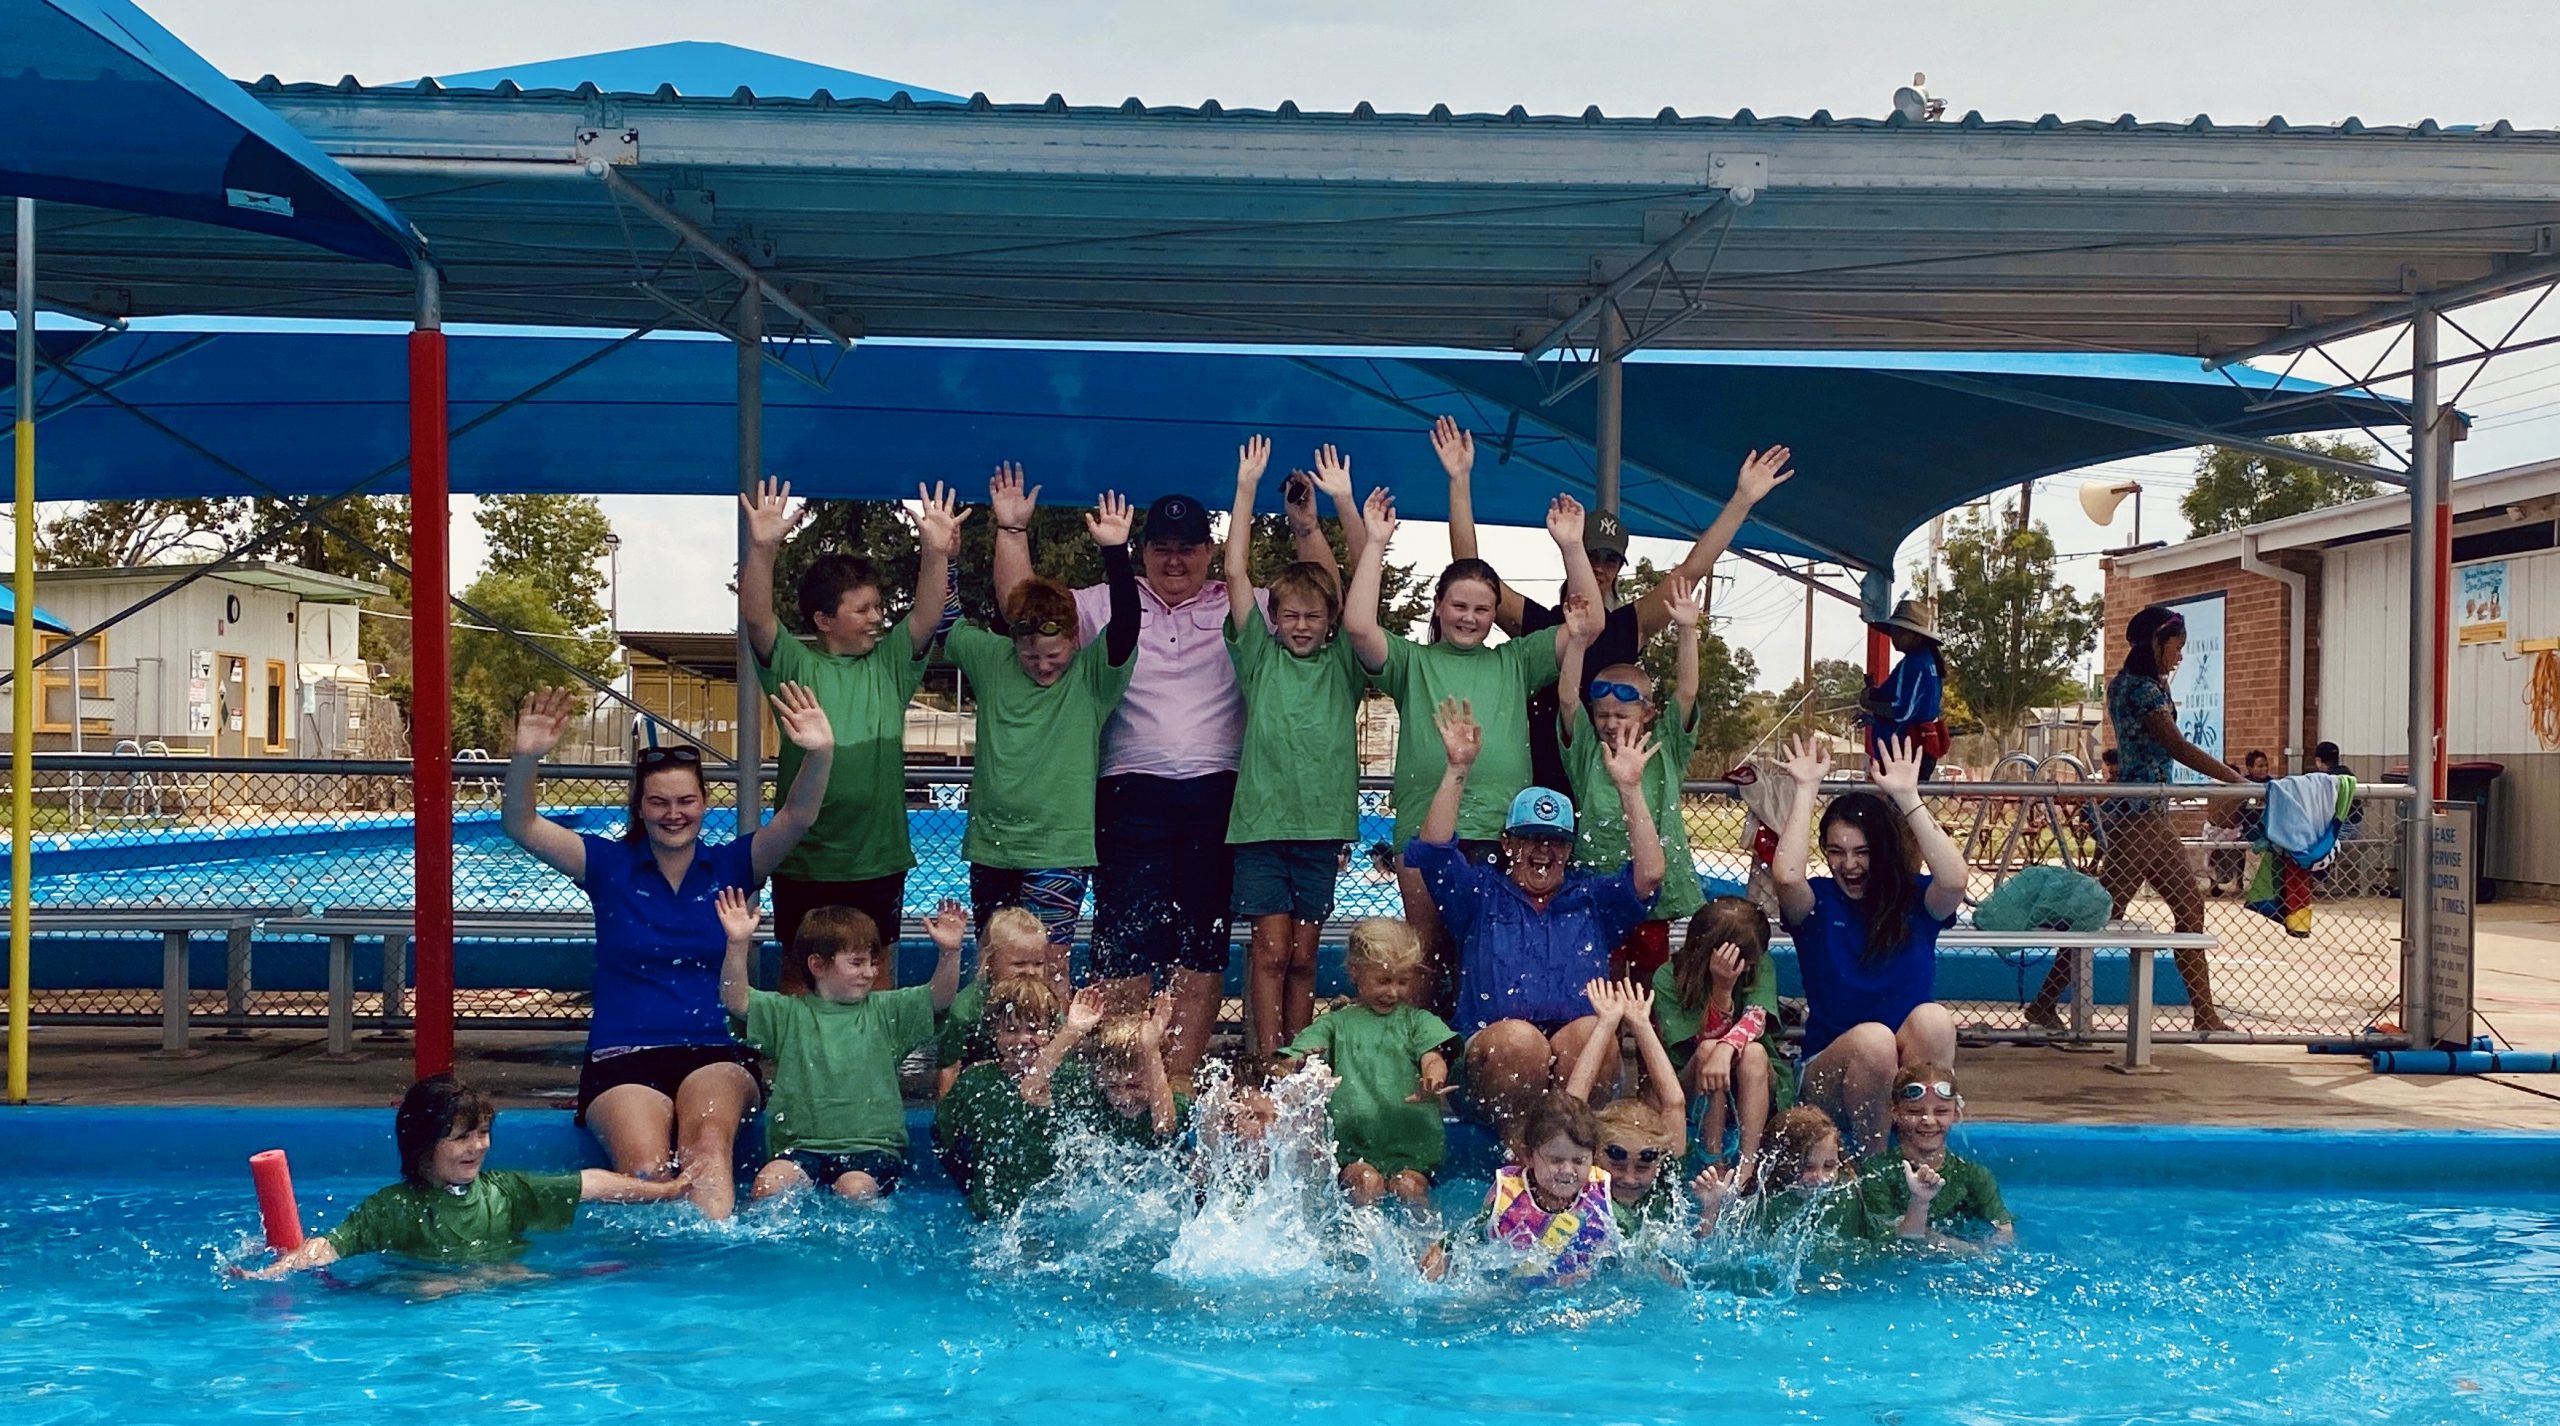 Children and educators from the Wee Waa Nurruby Out of School Hours, school holiday program enjoying a day out at the pool last Wednesday. Pictured, back row Billy Shearin, Byron Tully, WWOOSH coordinator Mary Ann Eason, Jett Palmer, Abby Noble and Lukah Bass, middle, Franxii Frichot, WWOOSH employee Abby Downes, Aziah Stevens, Zali Bass, Celia Galagher, WWOOSH educator Anita Wright, Loela Palmer, WWOOSH employee Madison Doring, front, Wylie Cruickshank, Lincoln Smolders, Tyler Simmonds, Emily Noble, Maecee Smith, Tatum Tout and Demi-Renee Cruickshank.